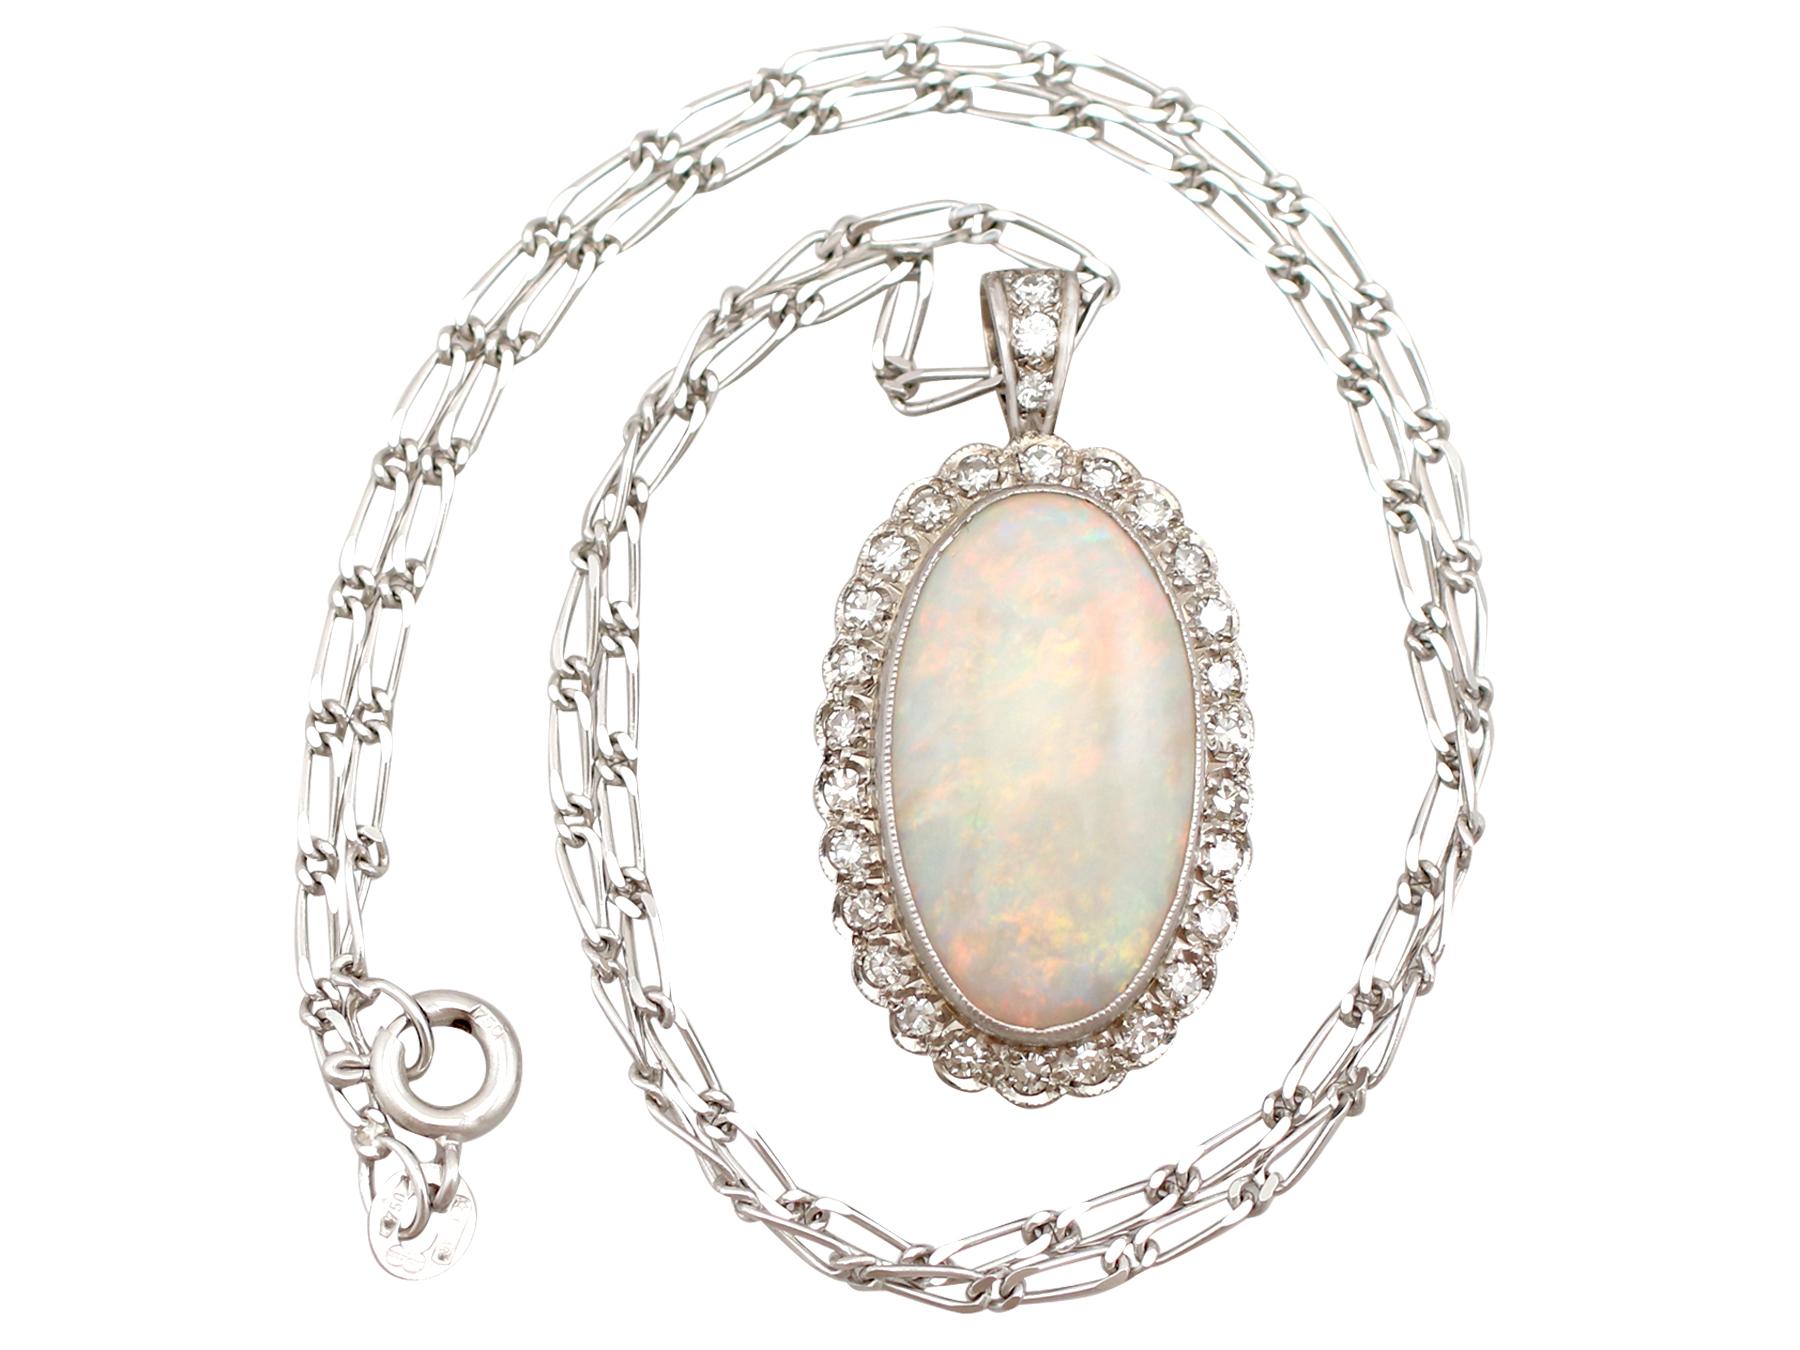 A stunning antique jewelry suite set with 8.18 carat white opal and 0.98 carat diamond, crafted in 9 karat white gold and platinum; part of our diverse antique estate jewelry collections.

This stunning, fine and impressive antique opal and diamond